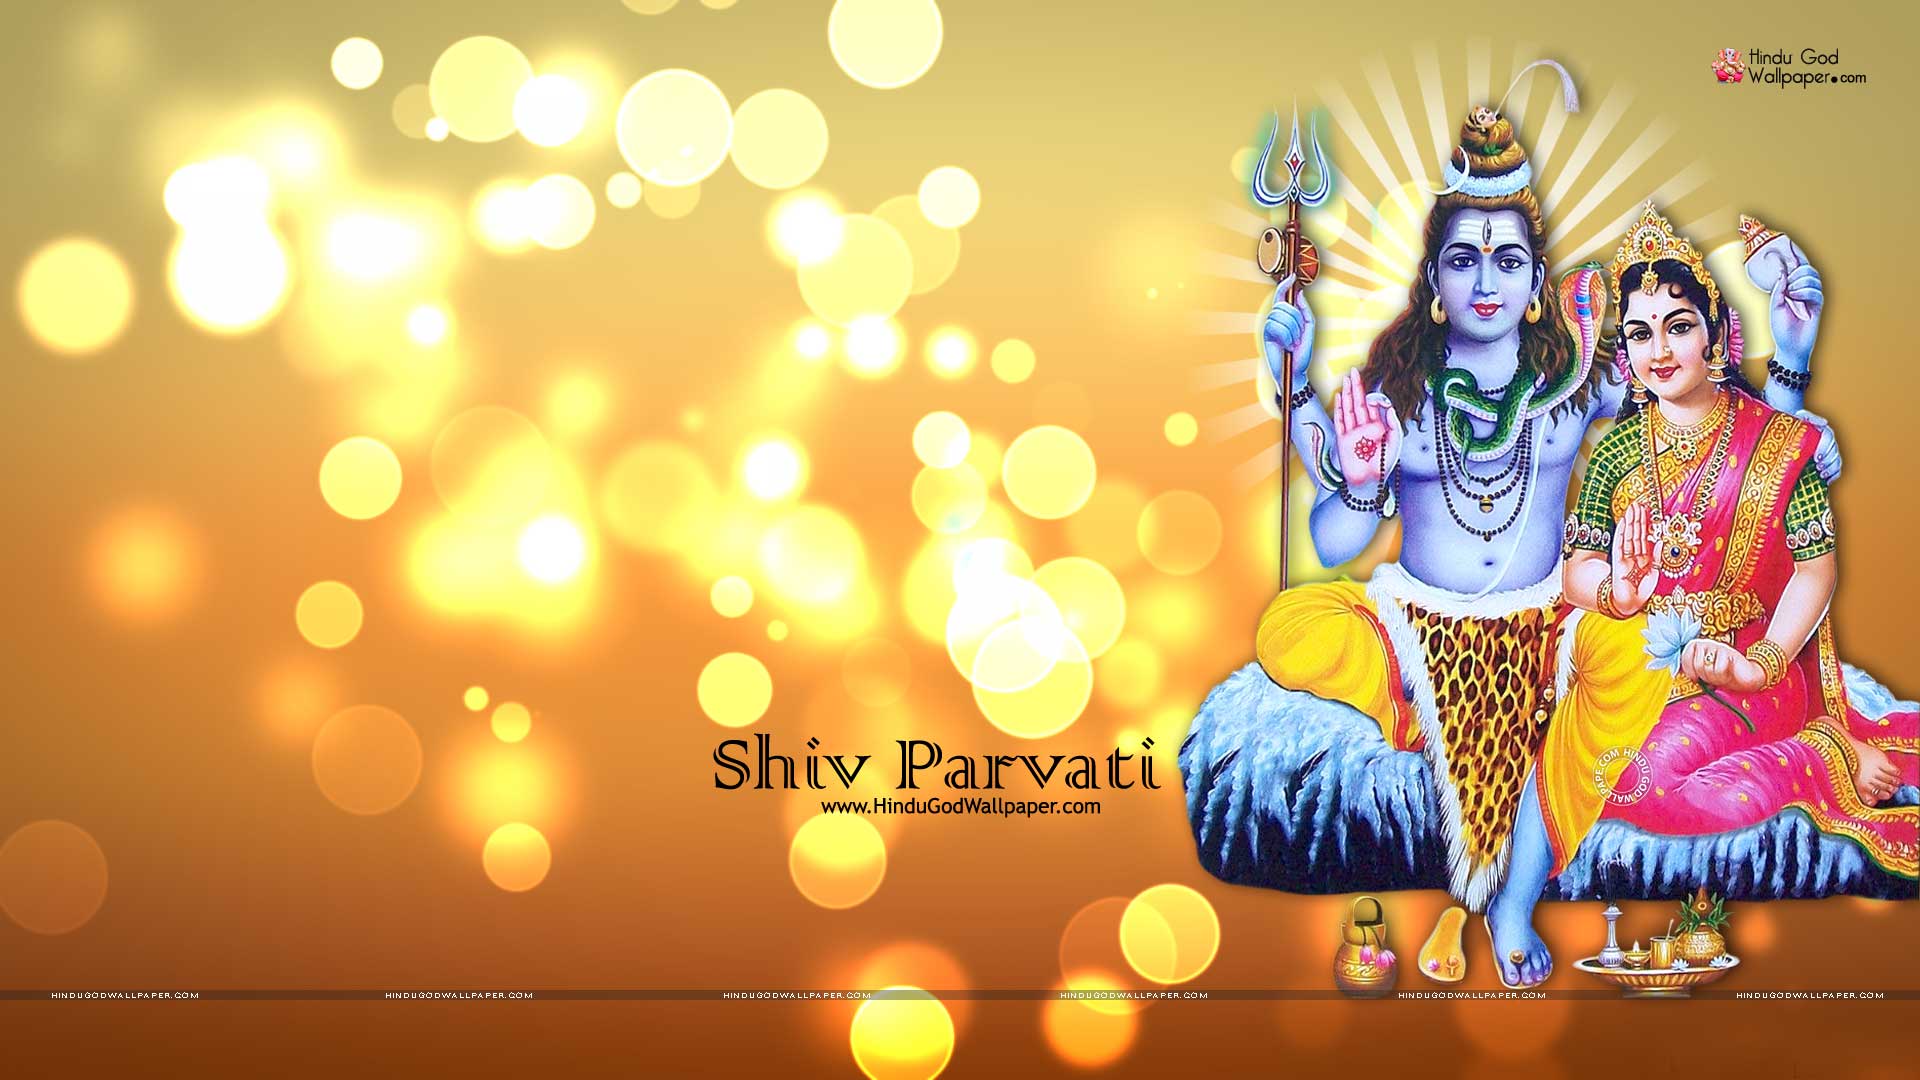 Shiv Parvati Wallpapers, HD Images, Photos, Pictures Free Download